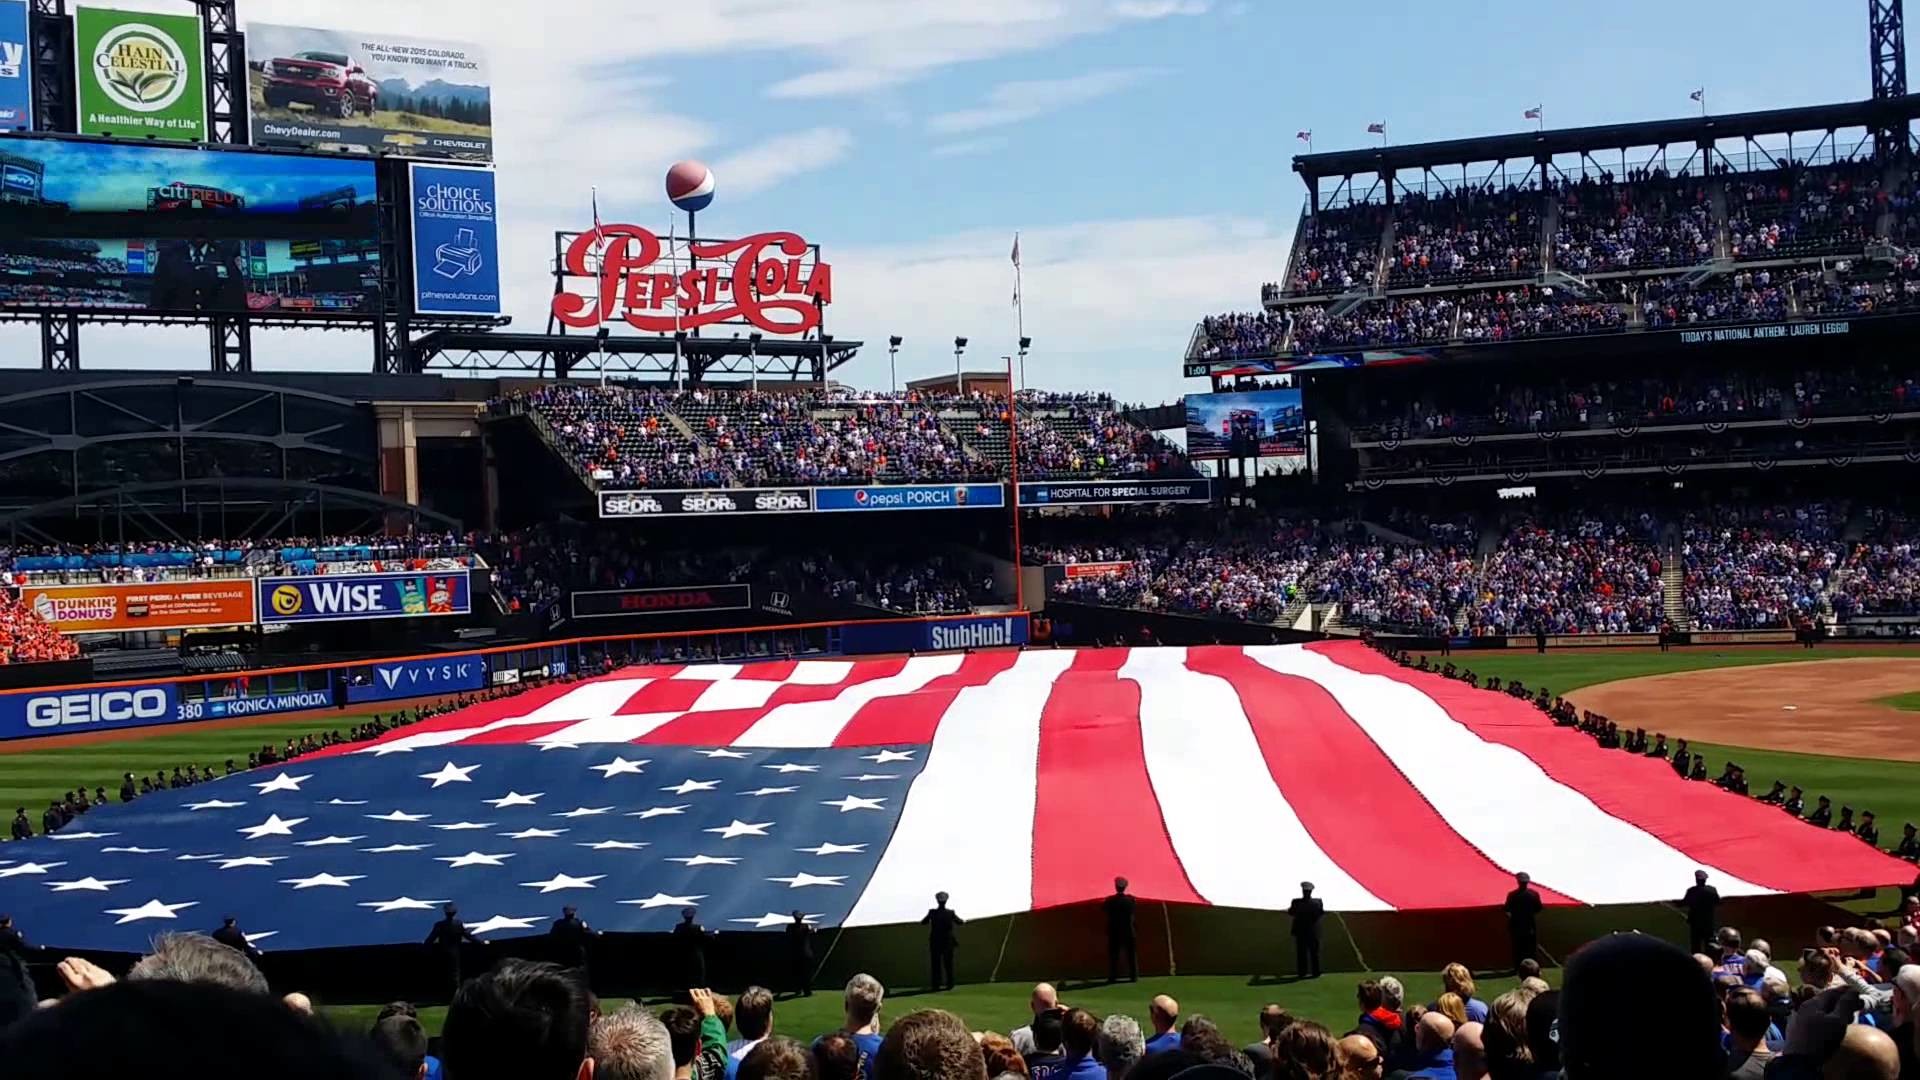 1920x1080 New York Mets 2015 opening day ceremony